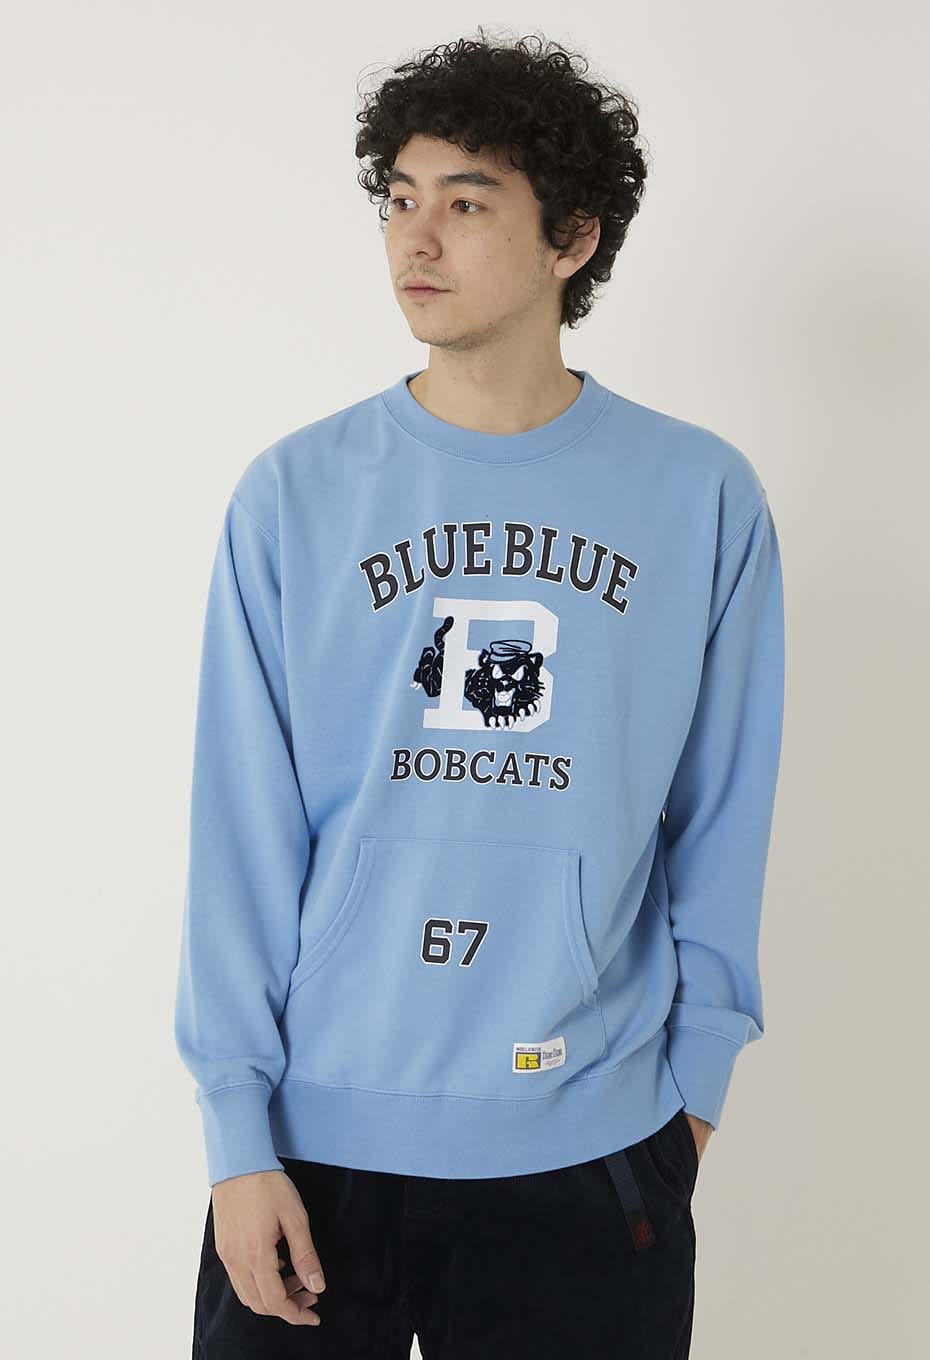 RUSSELL・BLUE BLUE|スウェット|RUSSELL BLUEBLUE ボブキャッツ 67 